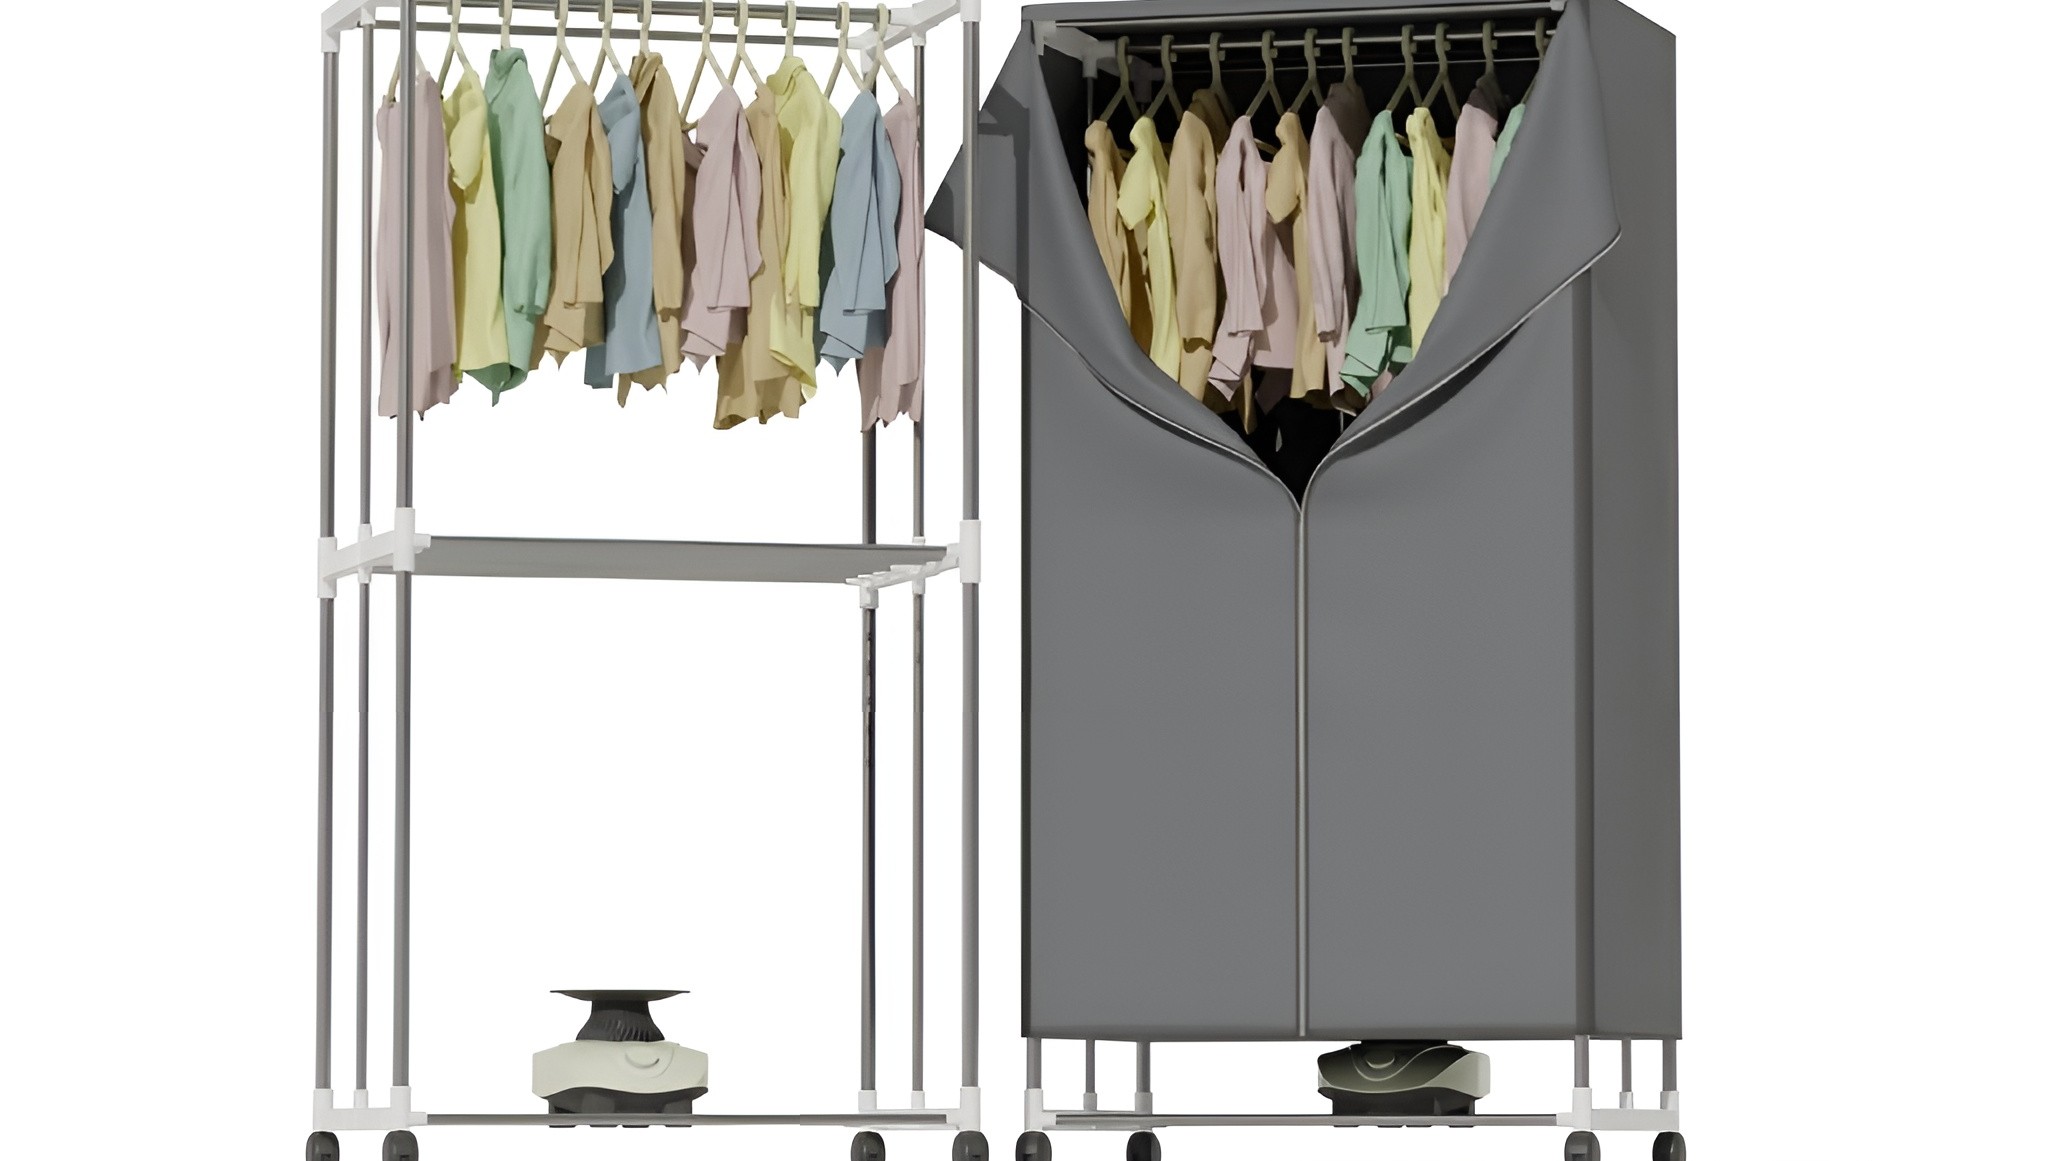 Heated Clothes Airer DMD Hang-n-Dry Electric Energy Efficient Drying Rack